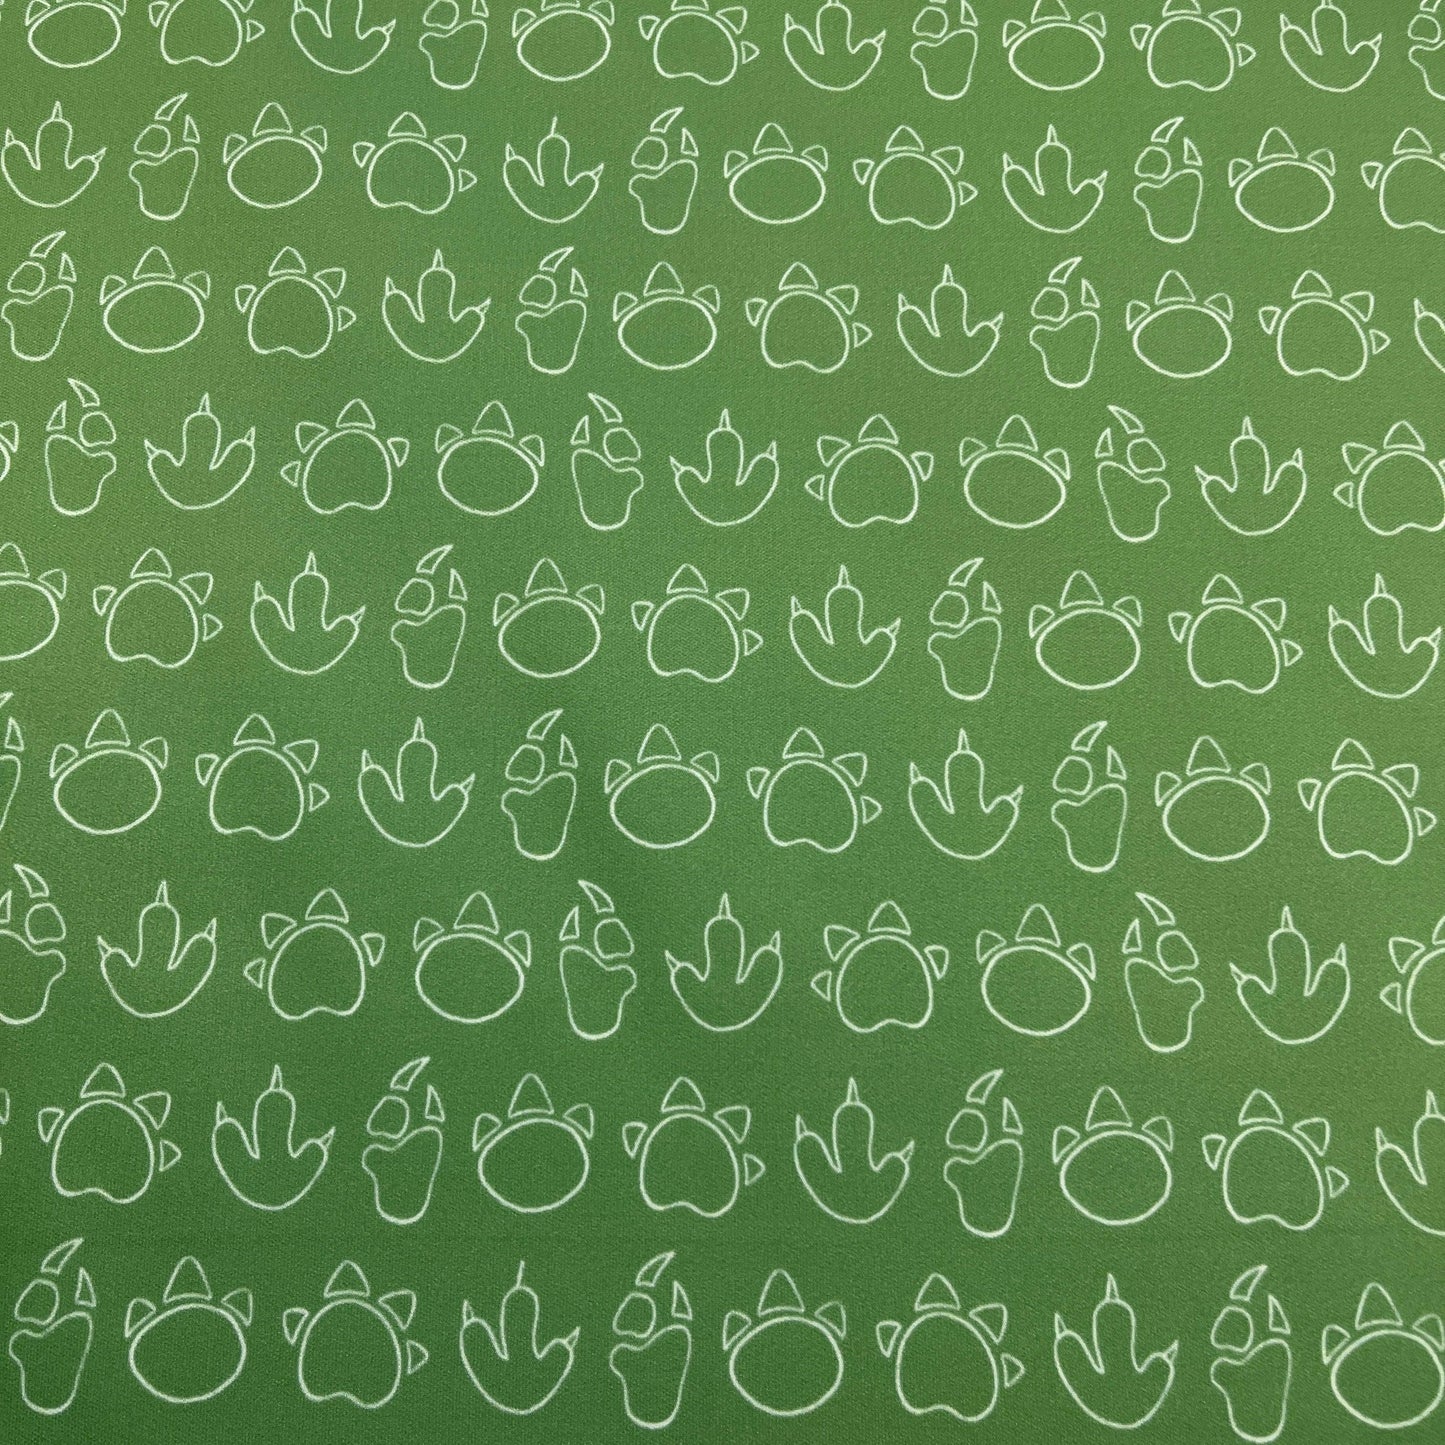 Dino Tracks on Green 1 mil PUL Fabric - Made in the USA - Nature's Fabrics